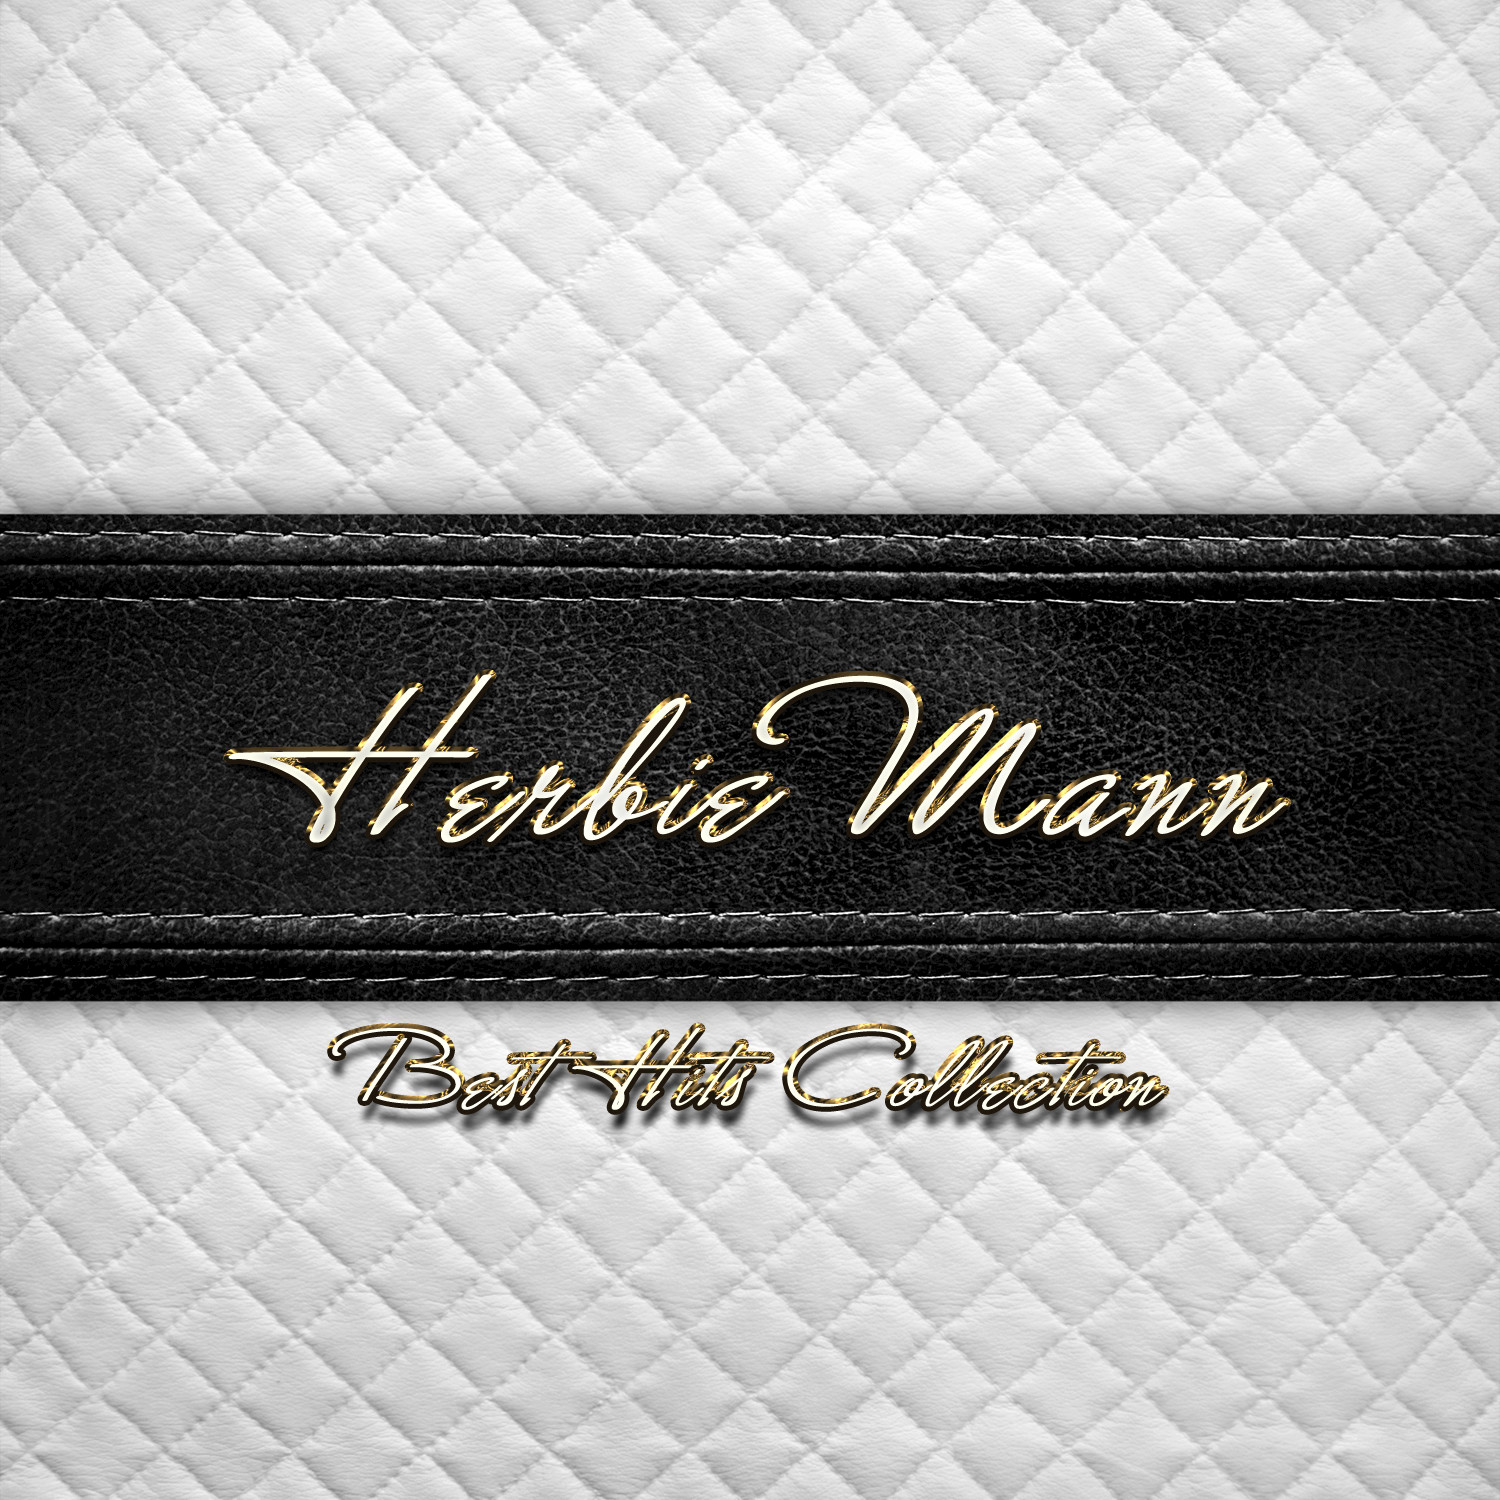 Best Hits Collection of Herbie Mann